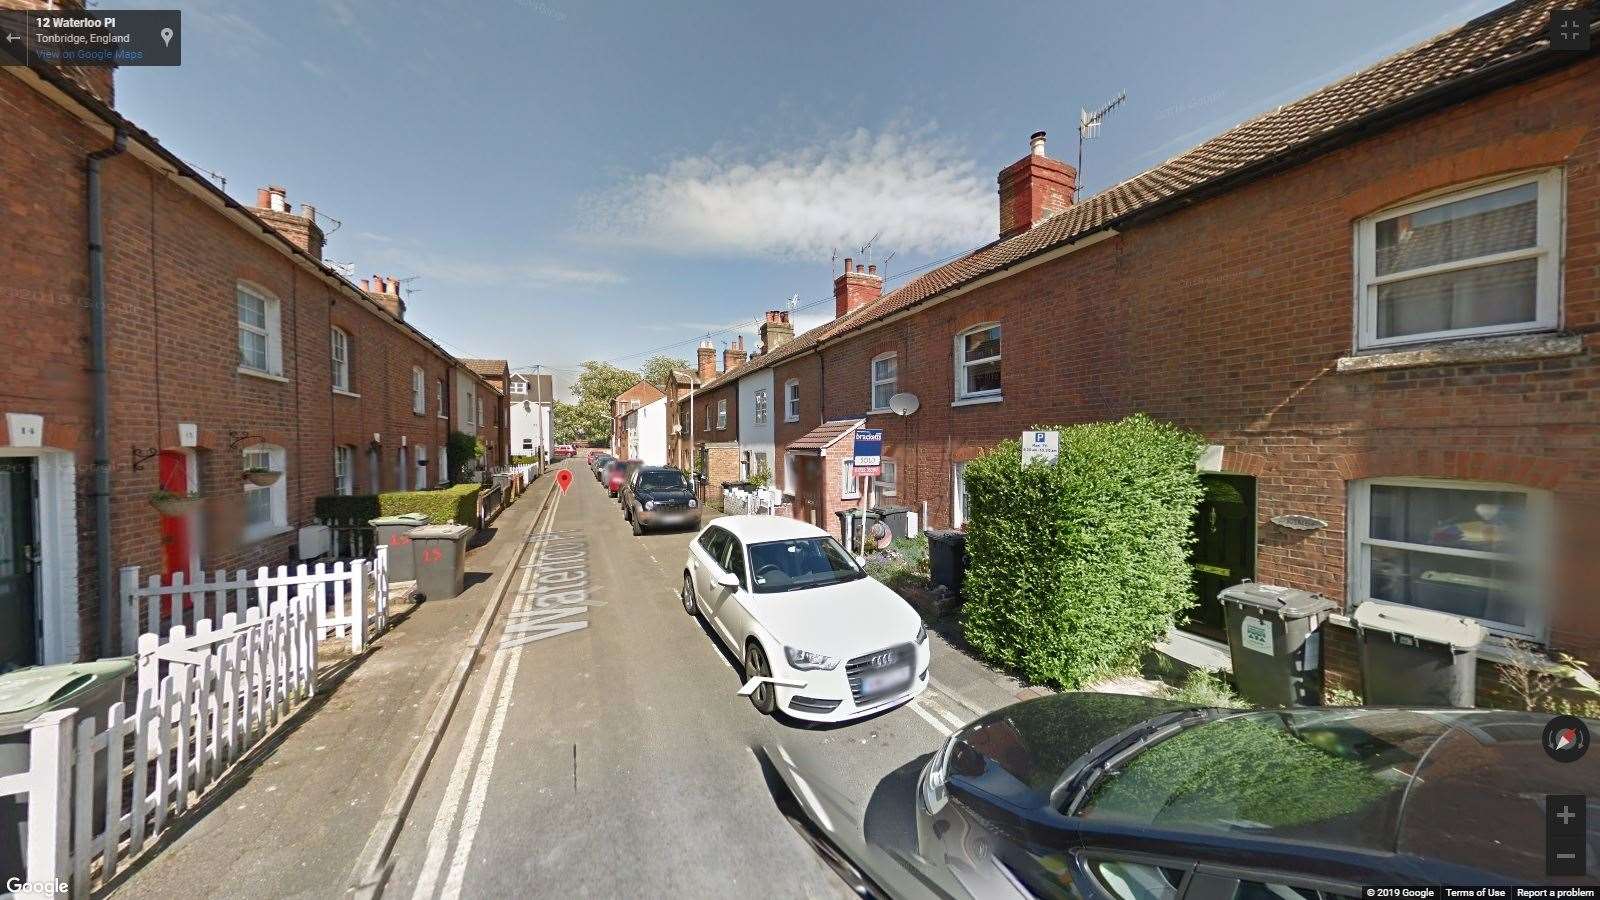 Kitche fire in Waterloo Place, Tonbridge. Picture: Google (14140019)